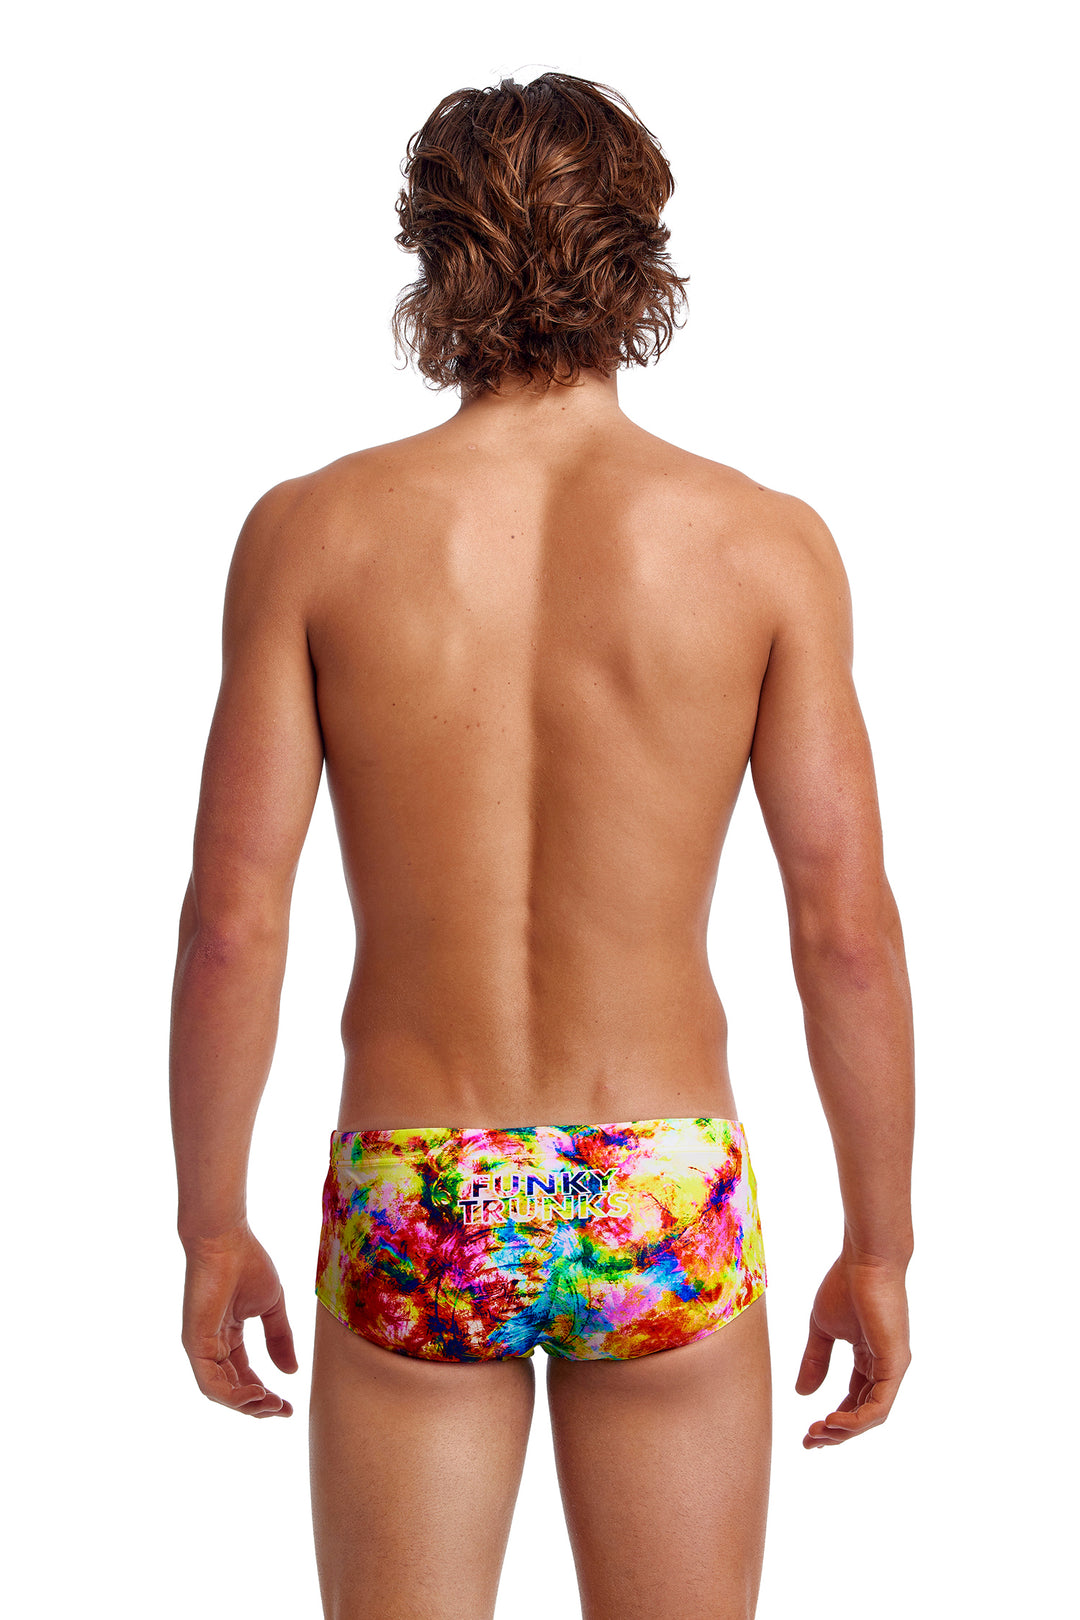 Out Trumped Sidewinder Trunks Swimsuit FTS010M - Men's